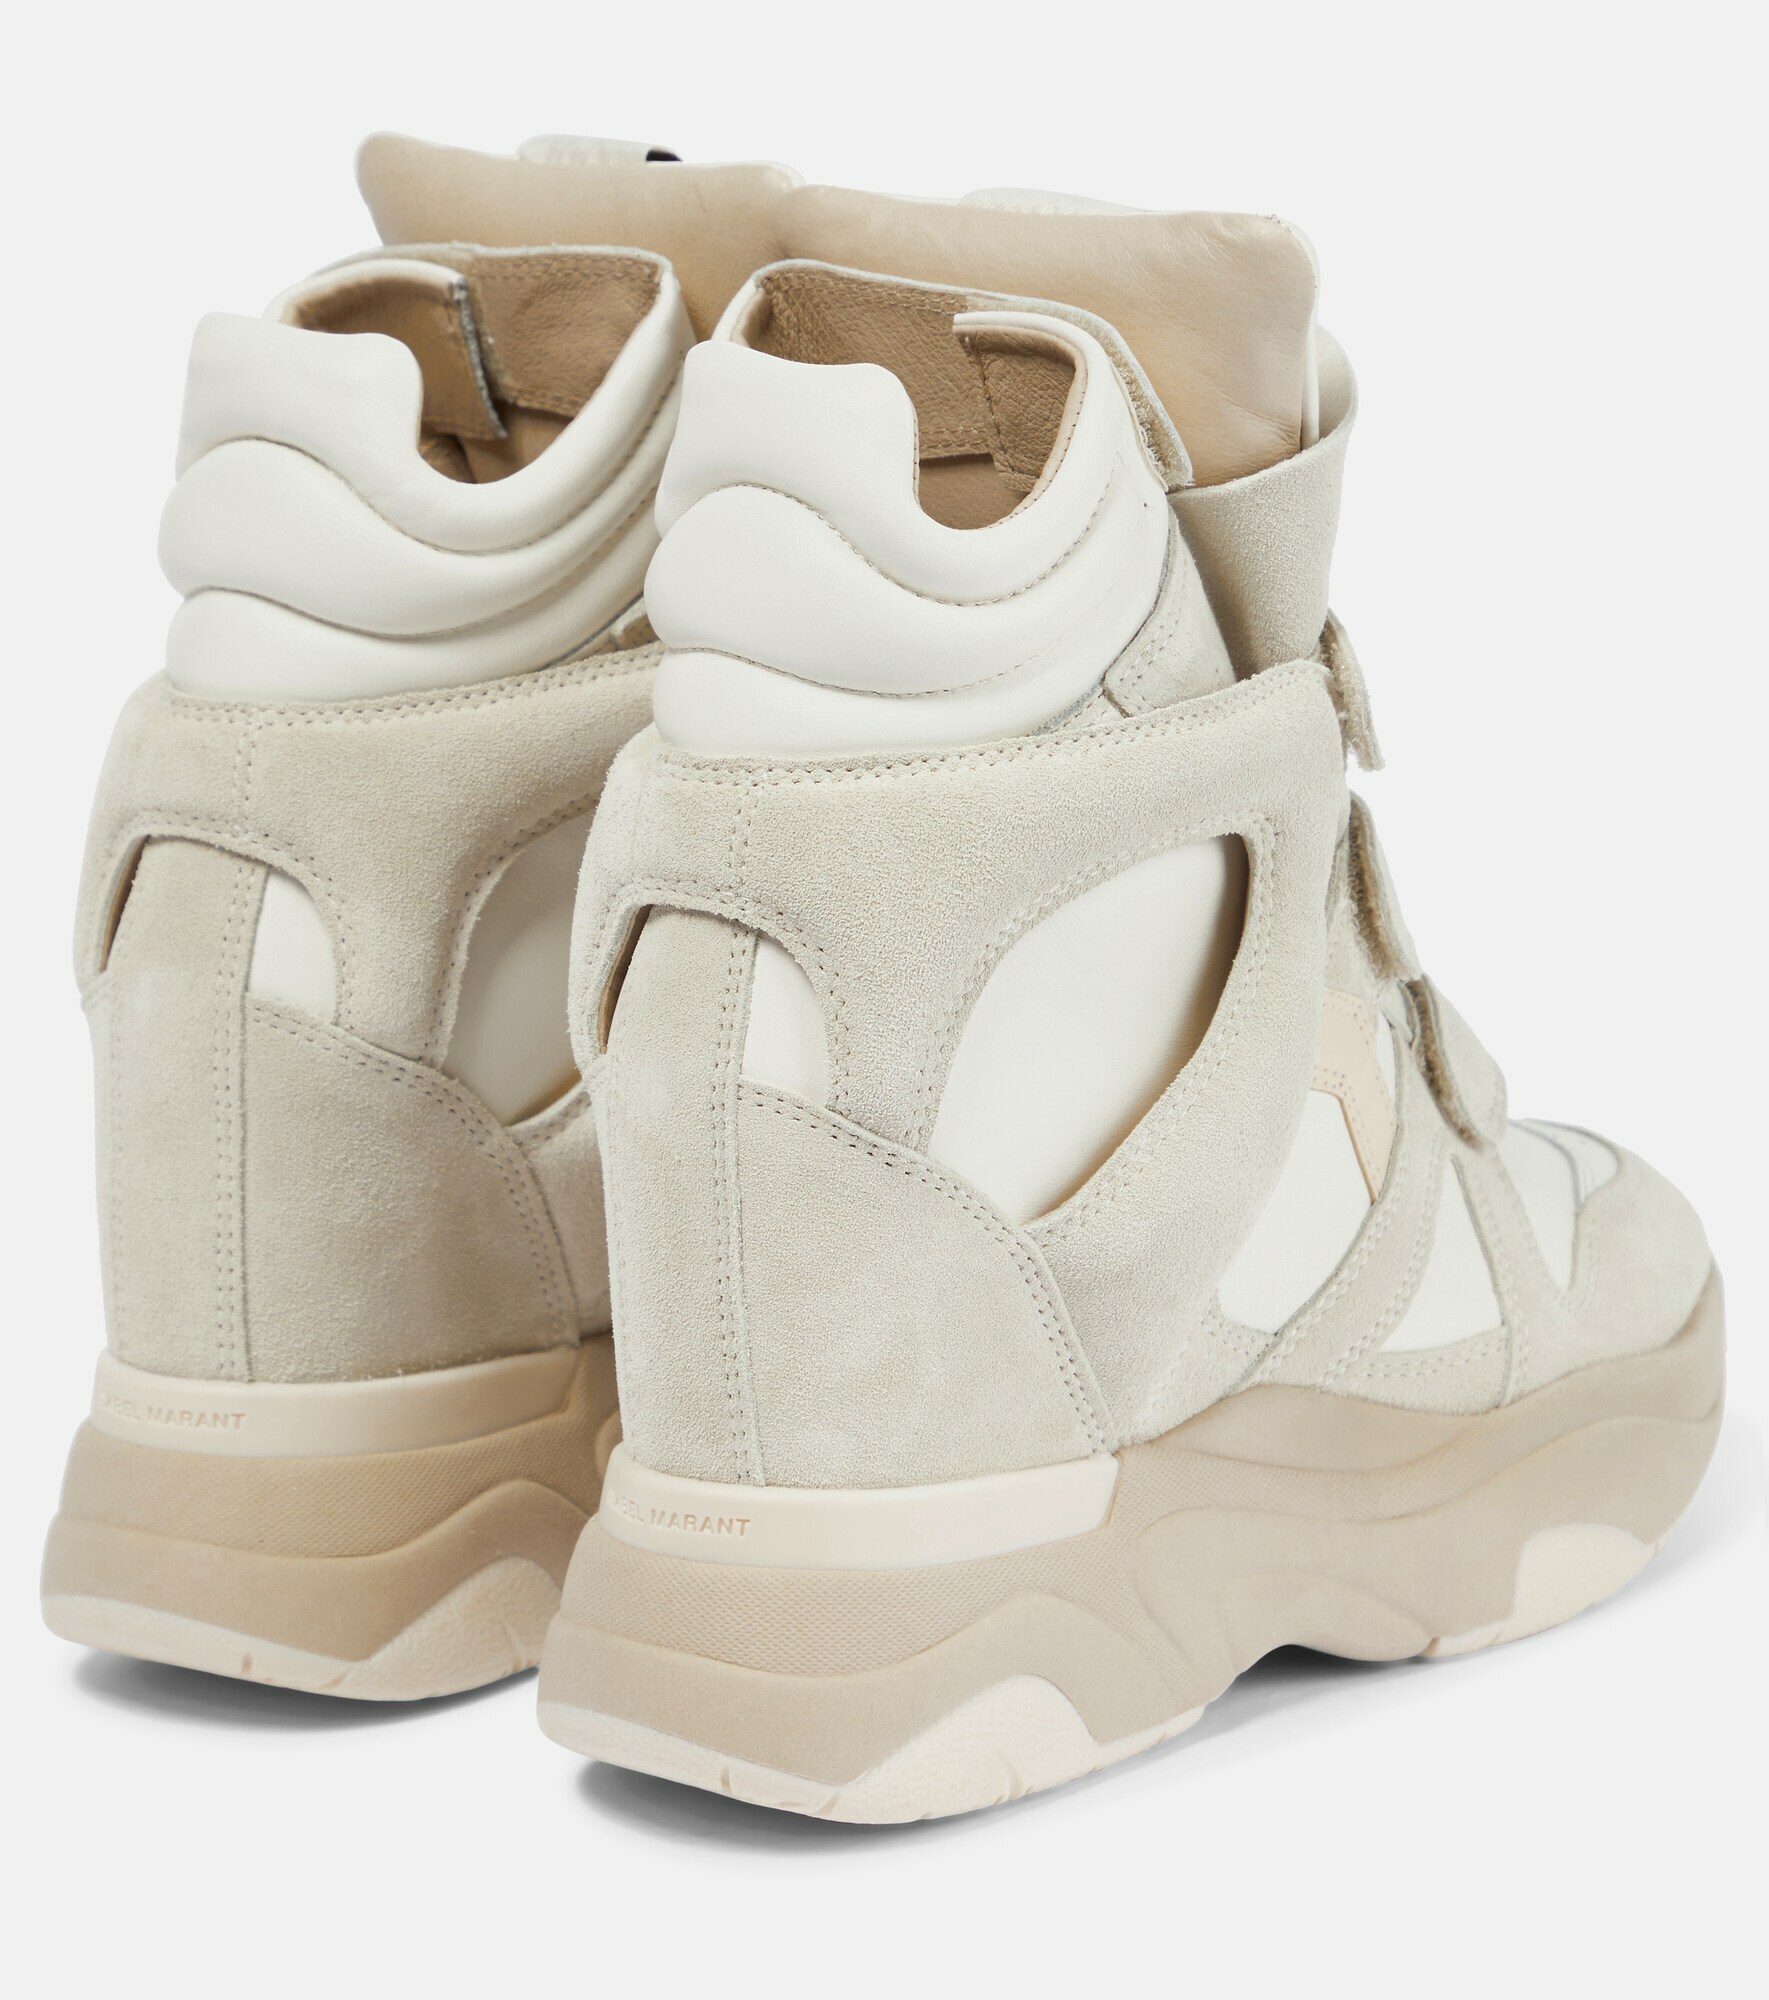 Isabel Marant - Balskee suede and leather wedge sneakers Isabel Marant